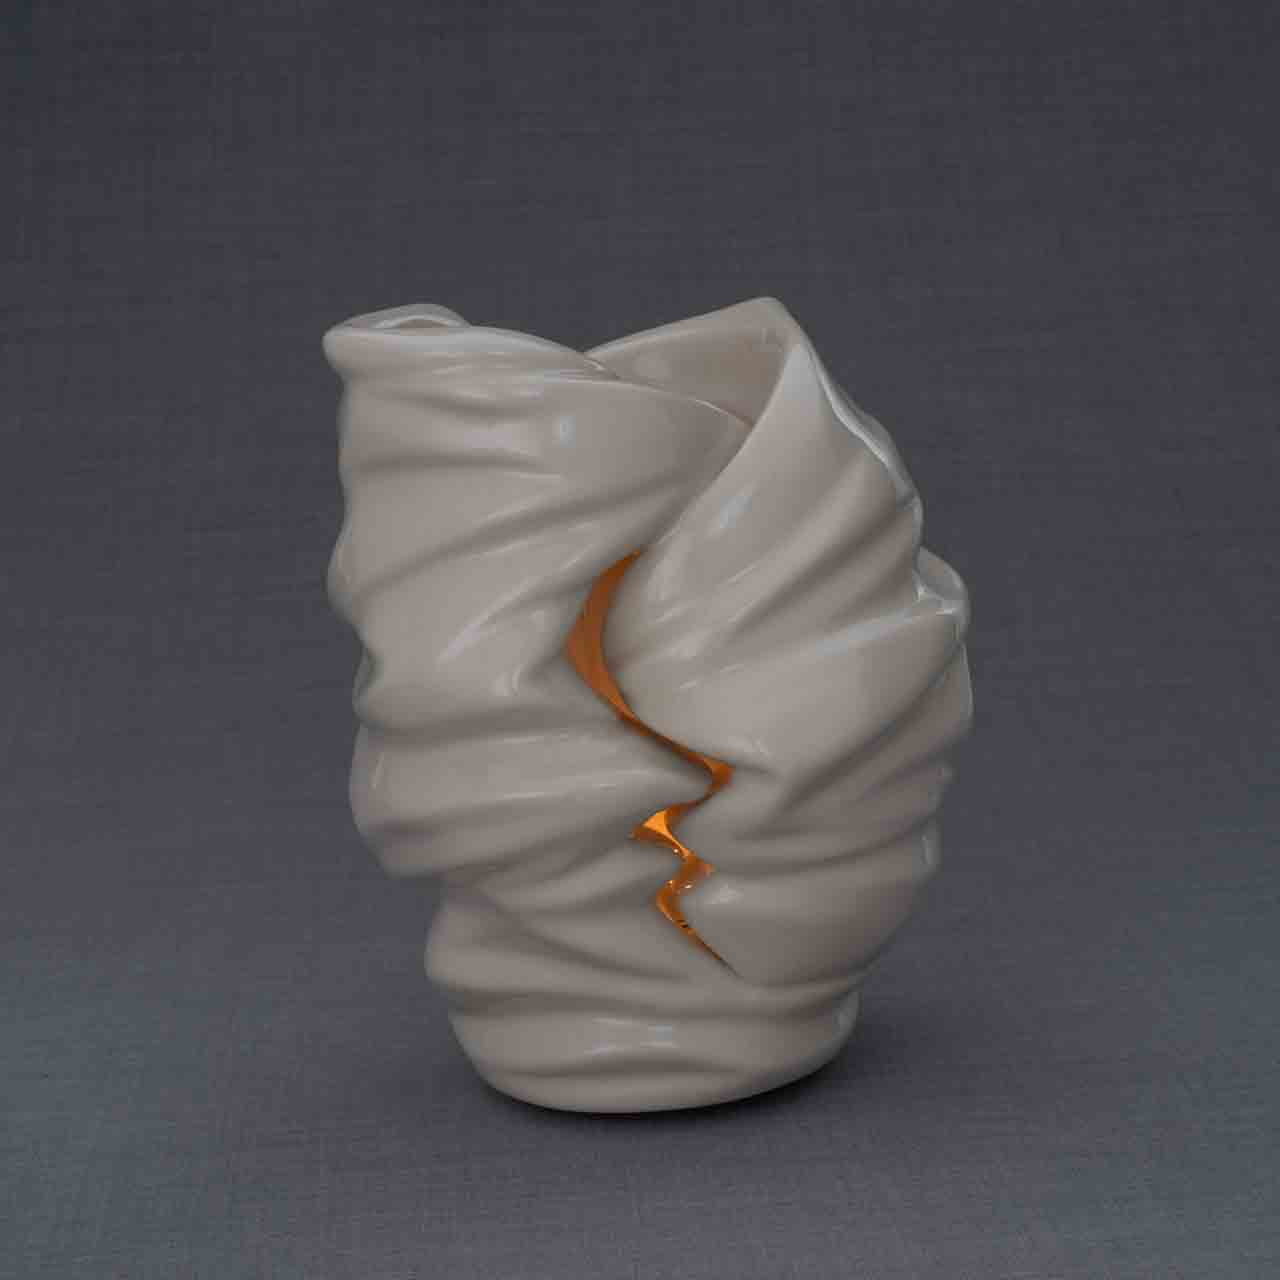 Light Adult Cremation Urn for Ashes in Cream